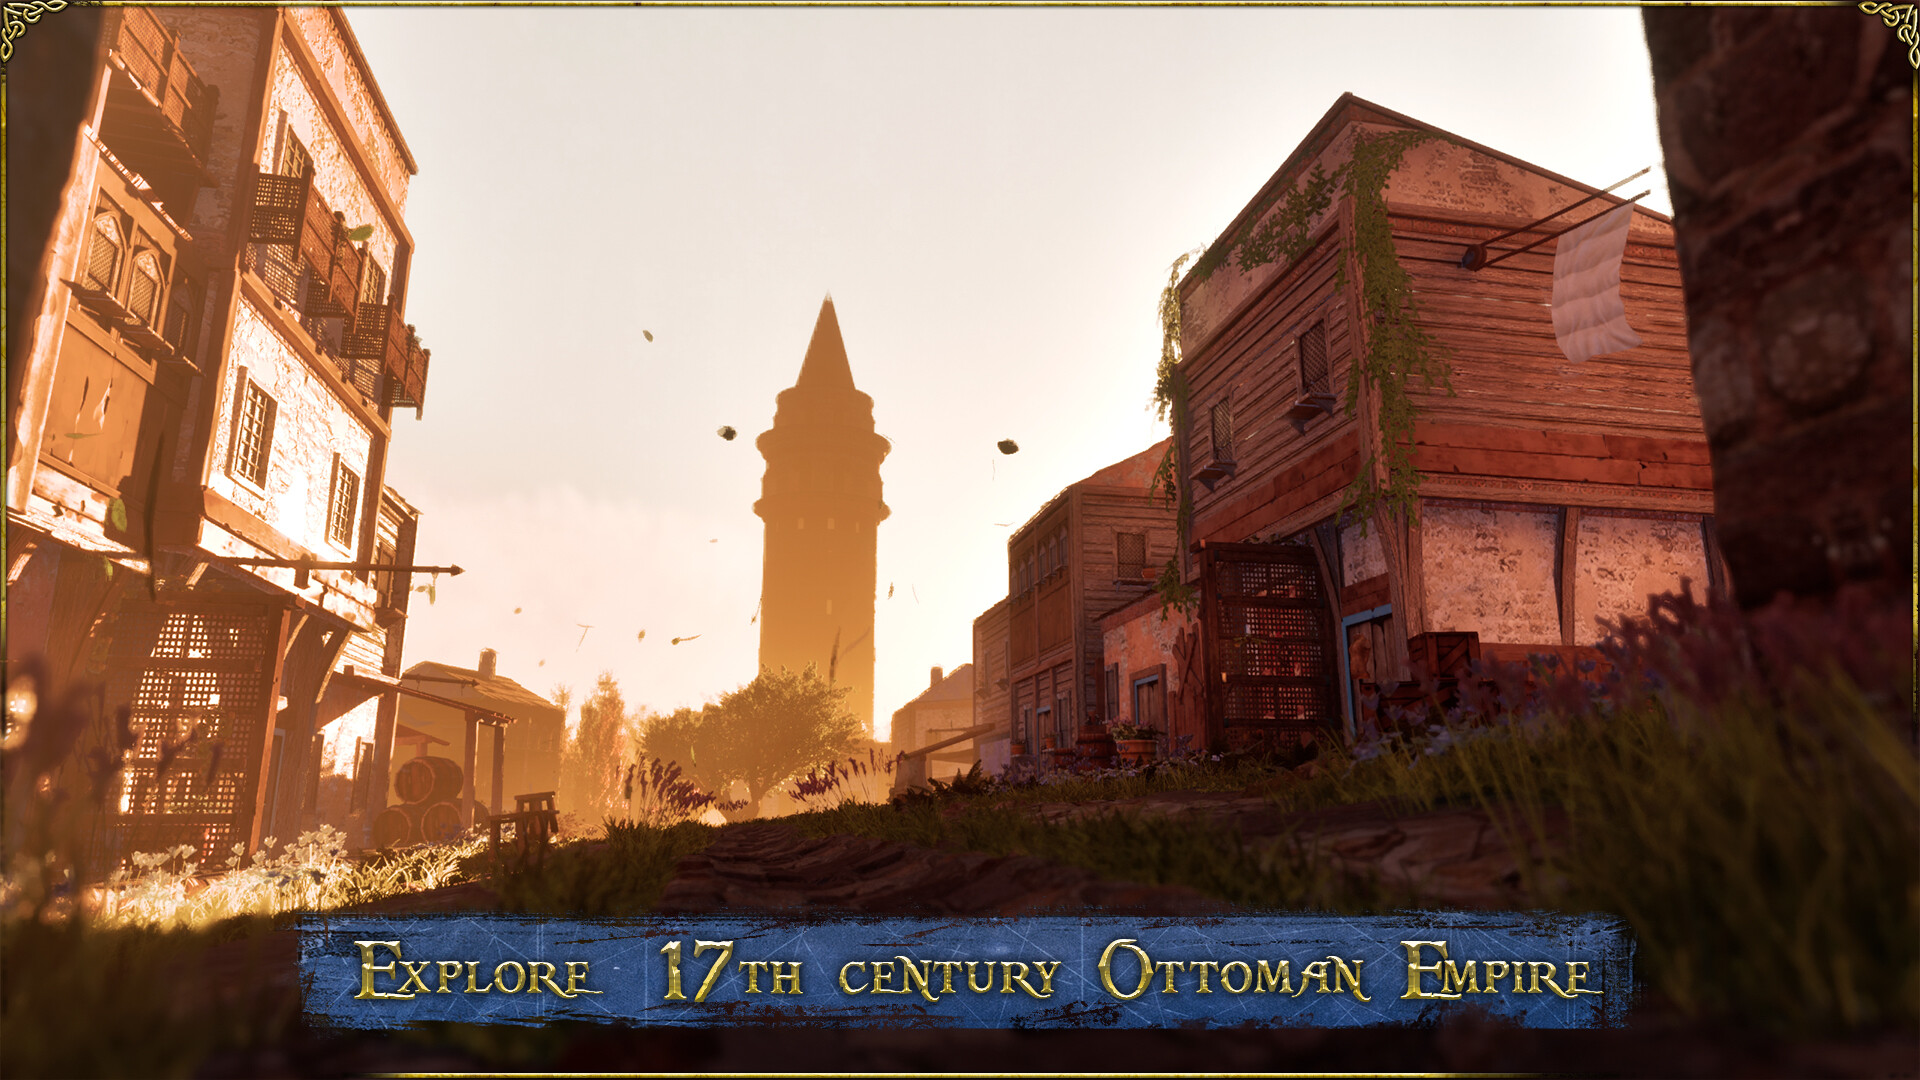 Compass of Destiny: Istanbul download the last version for windows